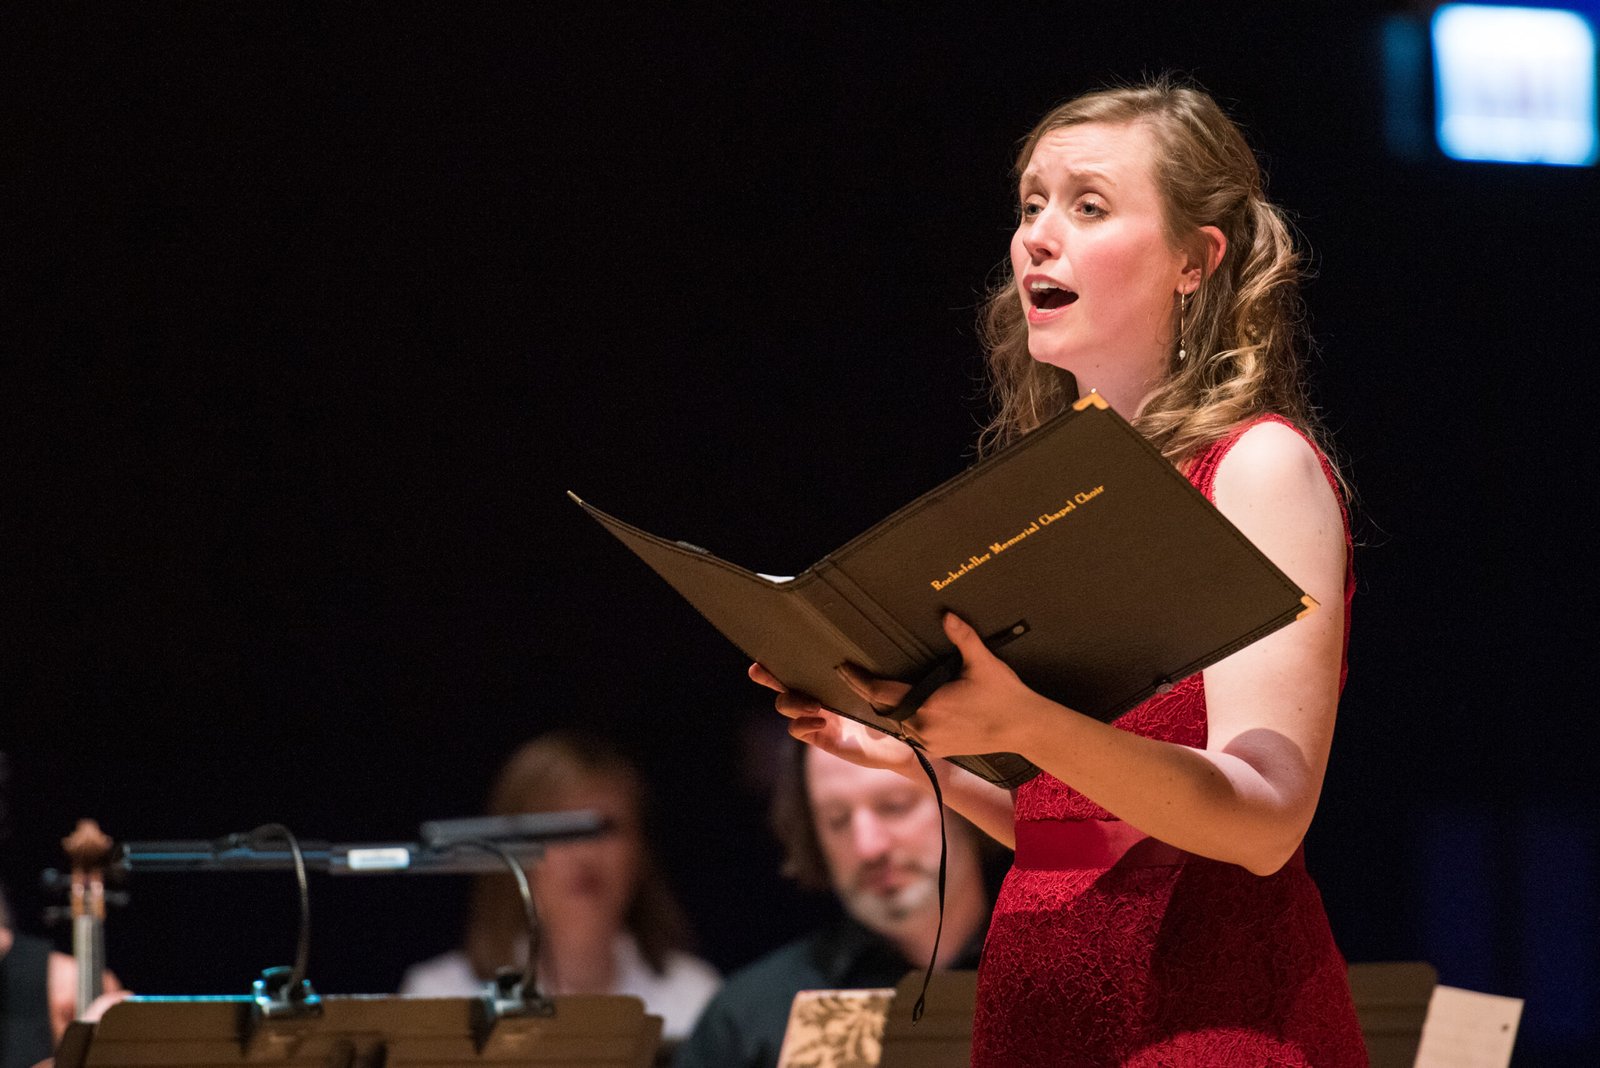 Soprano Kaitlin Foley sings the tragic tale of Susanna from the Book of Daniel in the Old Testament. La Susanna at Gannon Concert Hall by Haymarket Opera Company. Photo by Topher Alexander. 2022